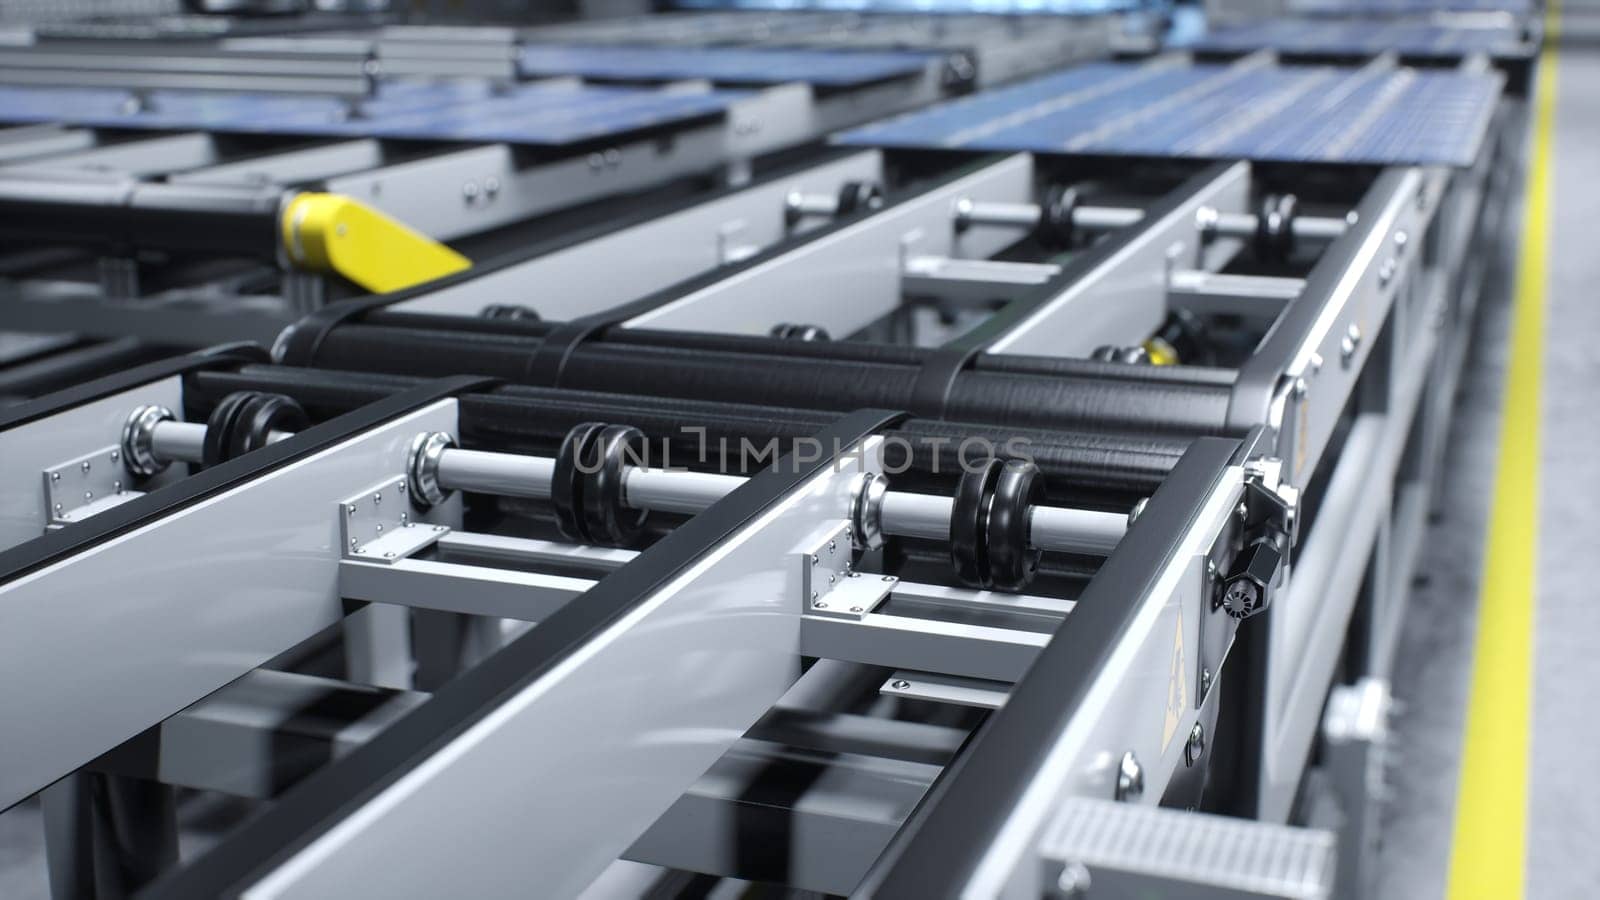 Focus on automated conveyor belt used for distributing solar panels, render by DCStudio